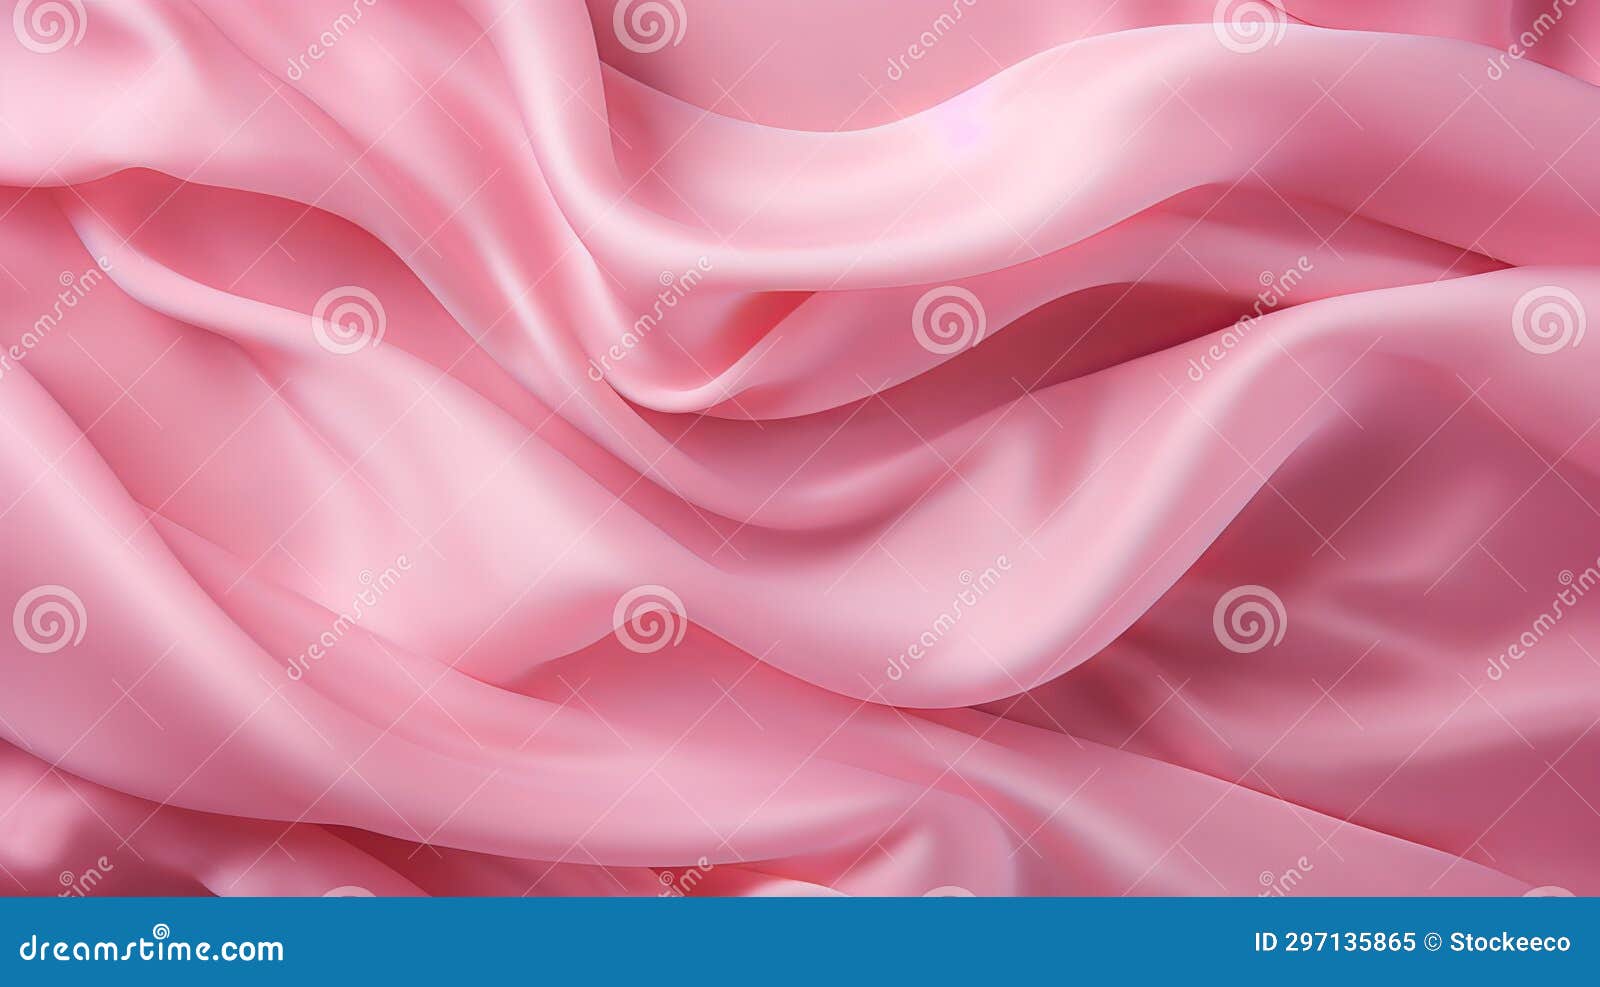 pink satin folds: uhd abstract photograph with dreamy atmosphere